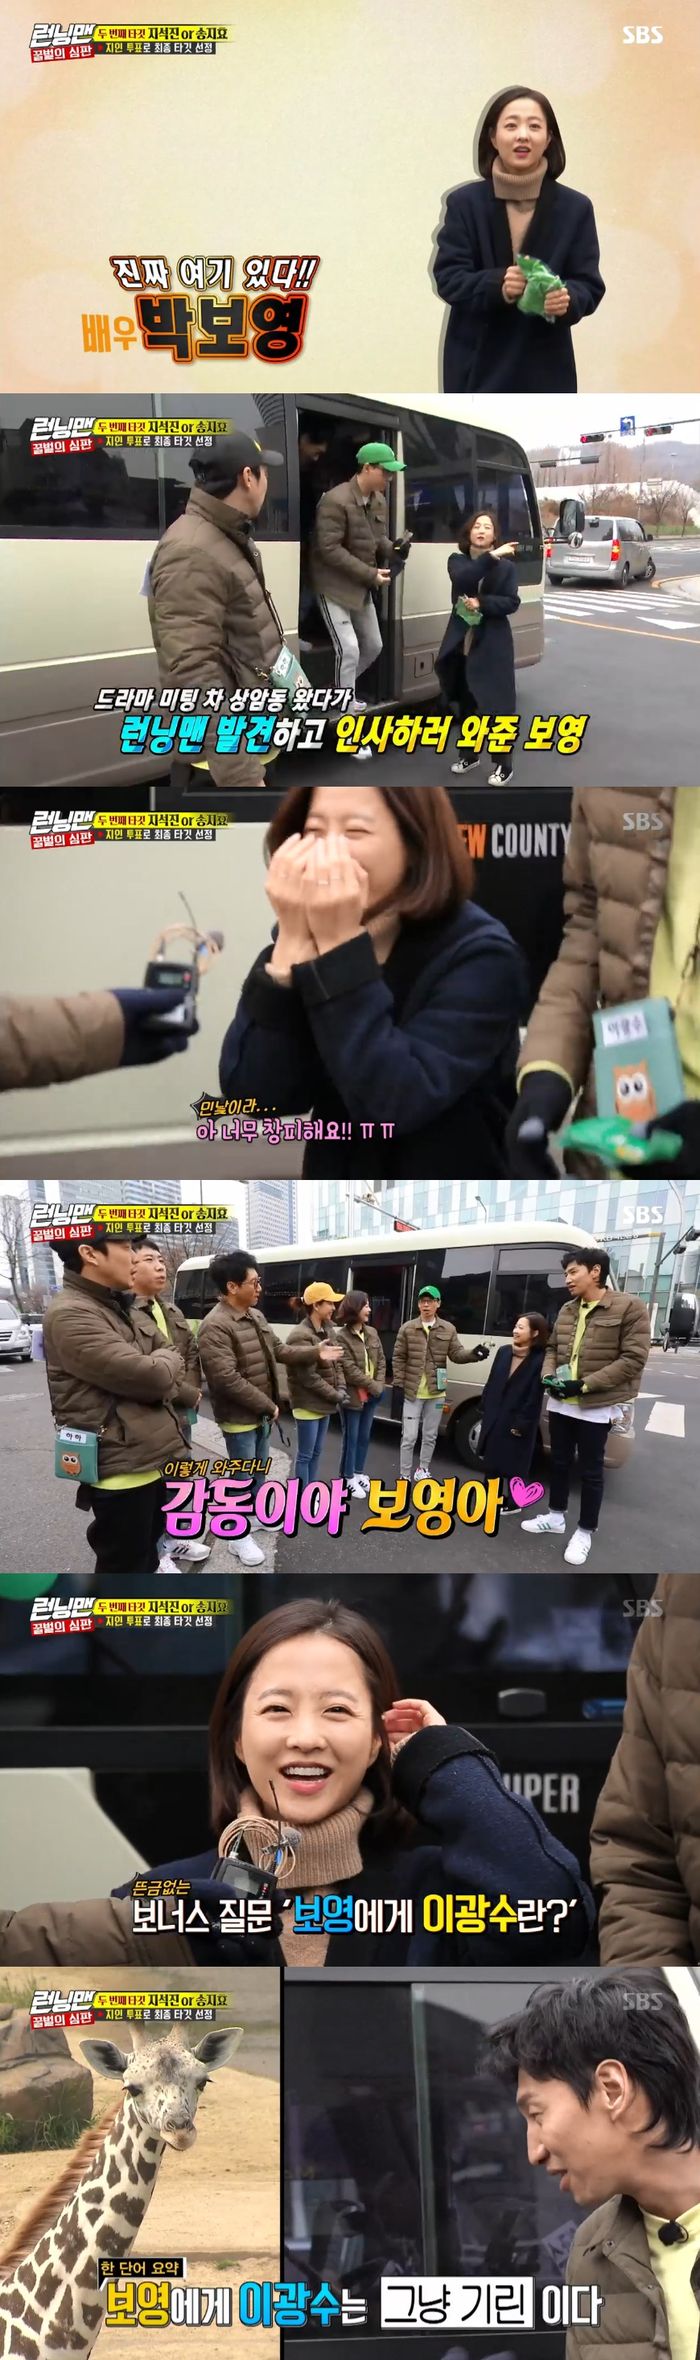 Park Bo-young made a surprise appearance.On SBS Running Man broadcasted on the 3rd, members of Running Man who visited entertainers and voted were drawn.The questionable bee pointed to Kim Jong-kook as the first target, and Kim Jong-kook was eliminated as a result of the vote.The second target candidates for the bees were Ji Suk-jin and Song Ji-hyo.Running Man members had to meet an entertainers acquaintance within an hour and vote for the members who would be eliminated.Nam Chang-hee greeted the members and finished the vote, and gave a smile and left by imitating director Lee Chang-dong.Running Man members who moved to Sangam-dong accidentally encountered Park Bo-young.I came to the new drama meeting car station and came to say hello to the shooting scene of Running Man, Park Bo-young said.Running Man members welcomed Park Bo-young and asked him to come out again once again.Park Bo-young was ashamed of the appearance of a non-make-up person, but the members praised his beauty, saying, It is so beautiful.Meanwhile, Lee Kwang-soo told Park Bo-young that he was a family-like person.Park Bo-young and Lee Kwang-soo were friends and fathers in the neighborhood.However, Park Bo-young laughed at Lee Kwang-soo by drawing a line saying, For me, Lee Kwang-soo is a giraffe.